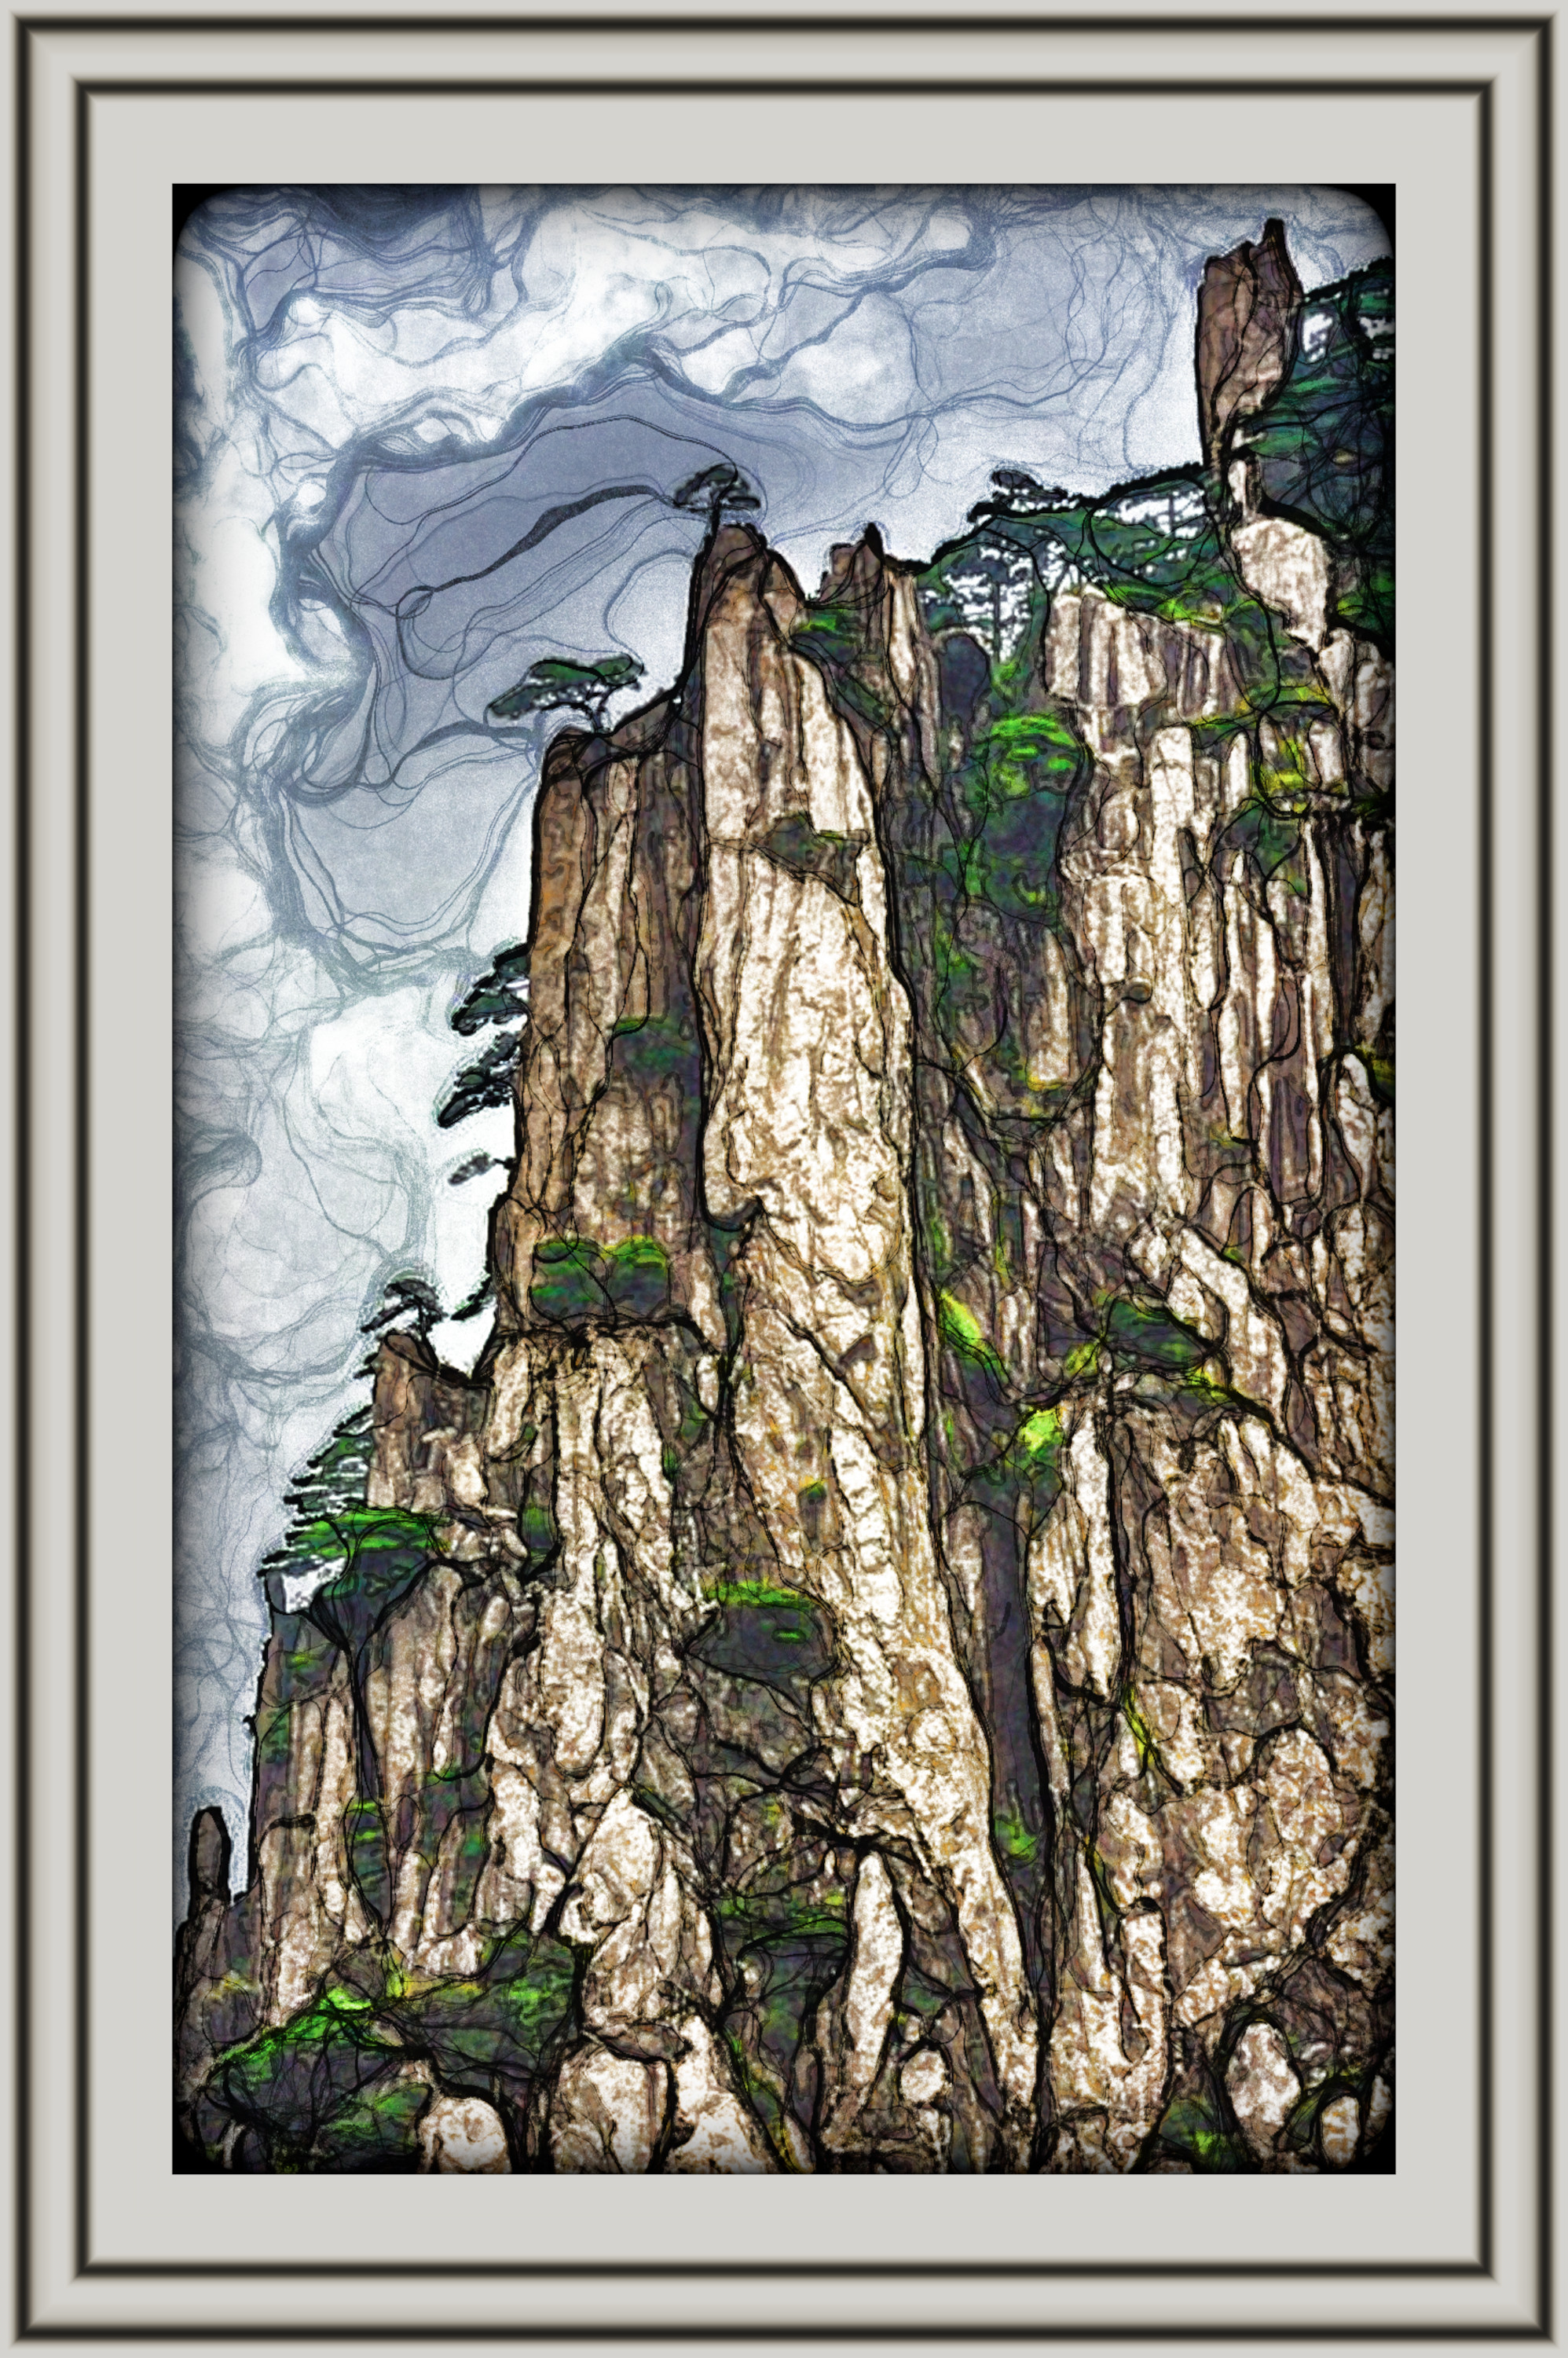 2024-03-19 16-03-58 Mountains of China_Huangshan with Lines Art effect, preset=3000,3.5,100,0,13,RGB (0.78431372549, 0.78431372549, 0.78431372549, 1.0),0,1.jpg